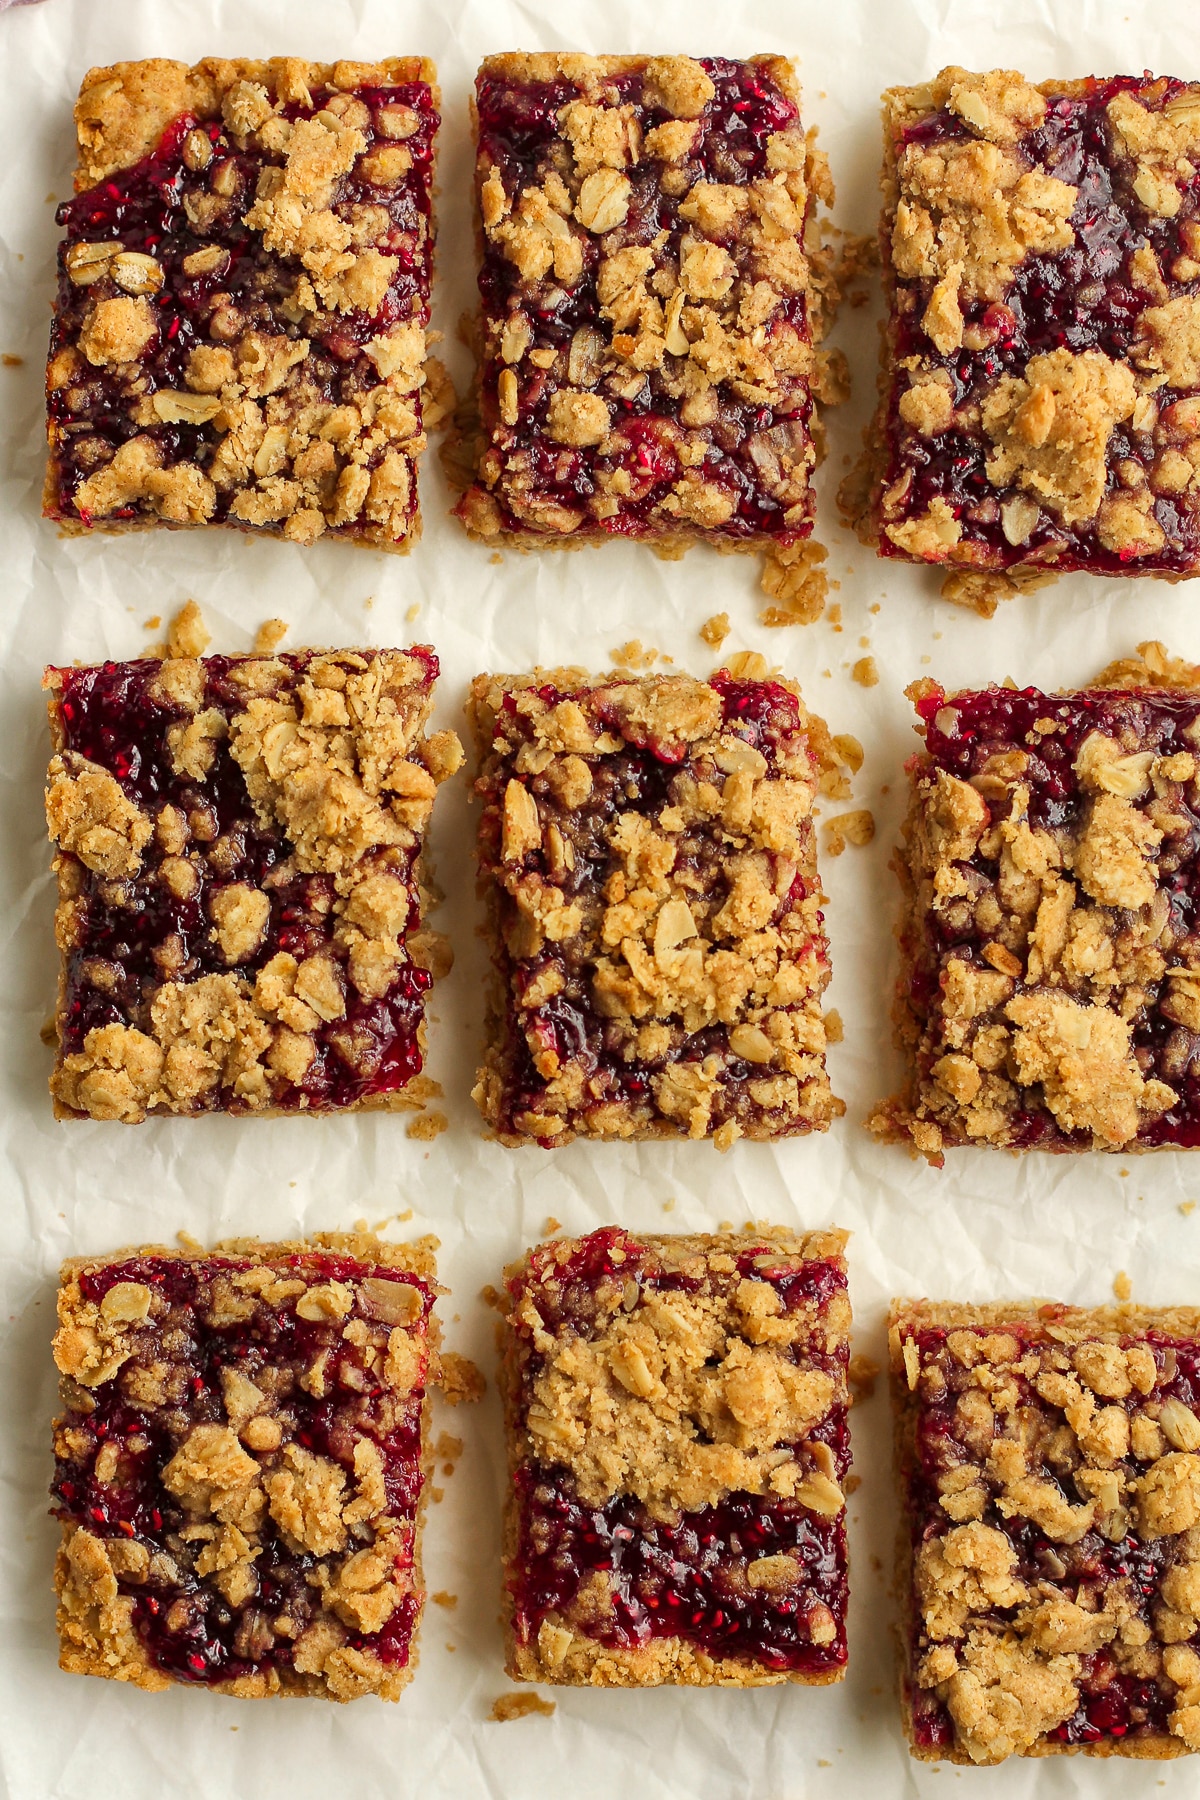 Some sliced jam bars on parchment paper.